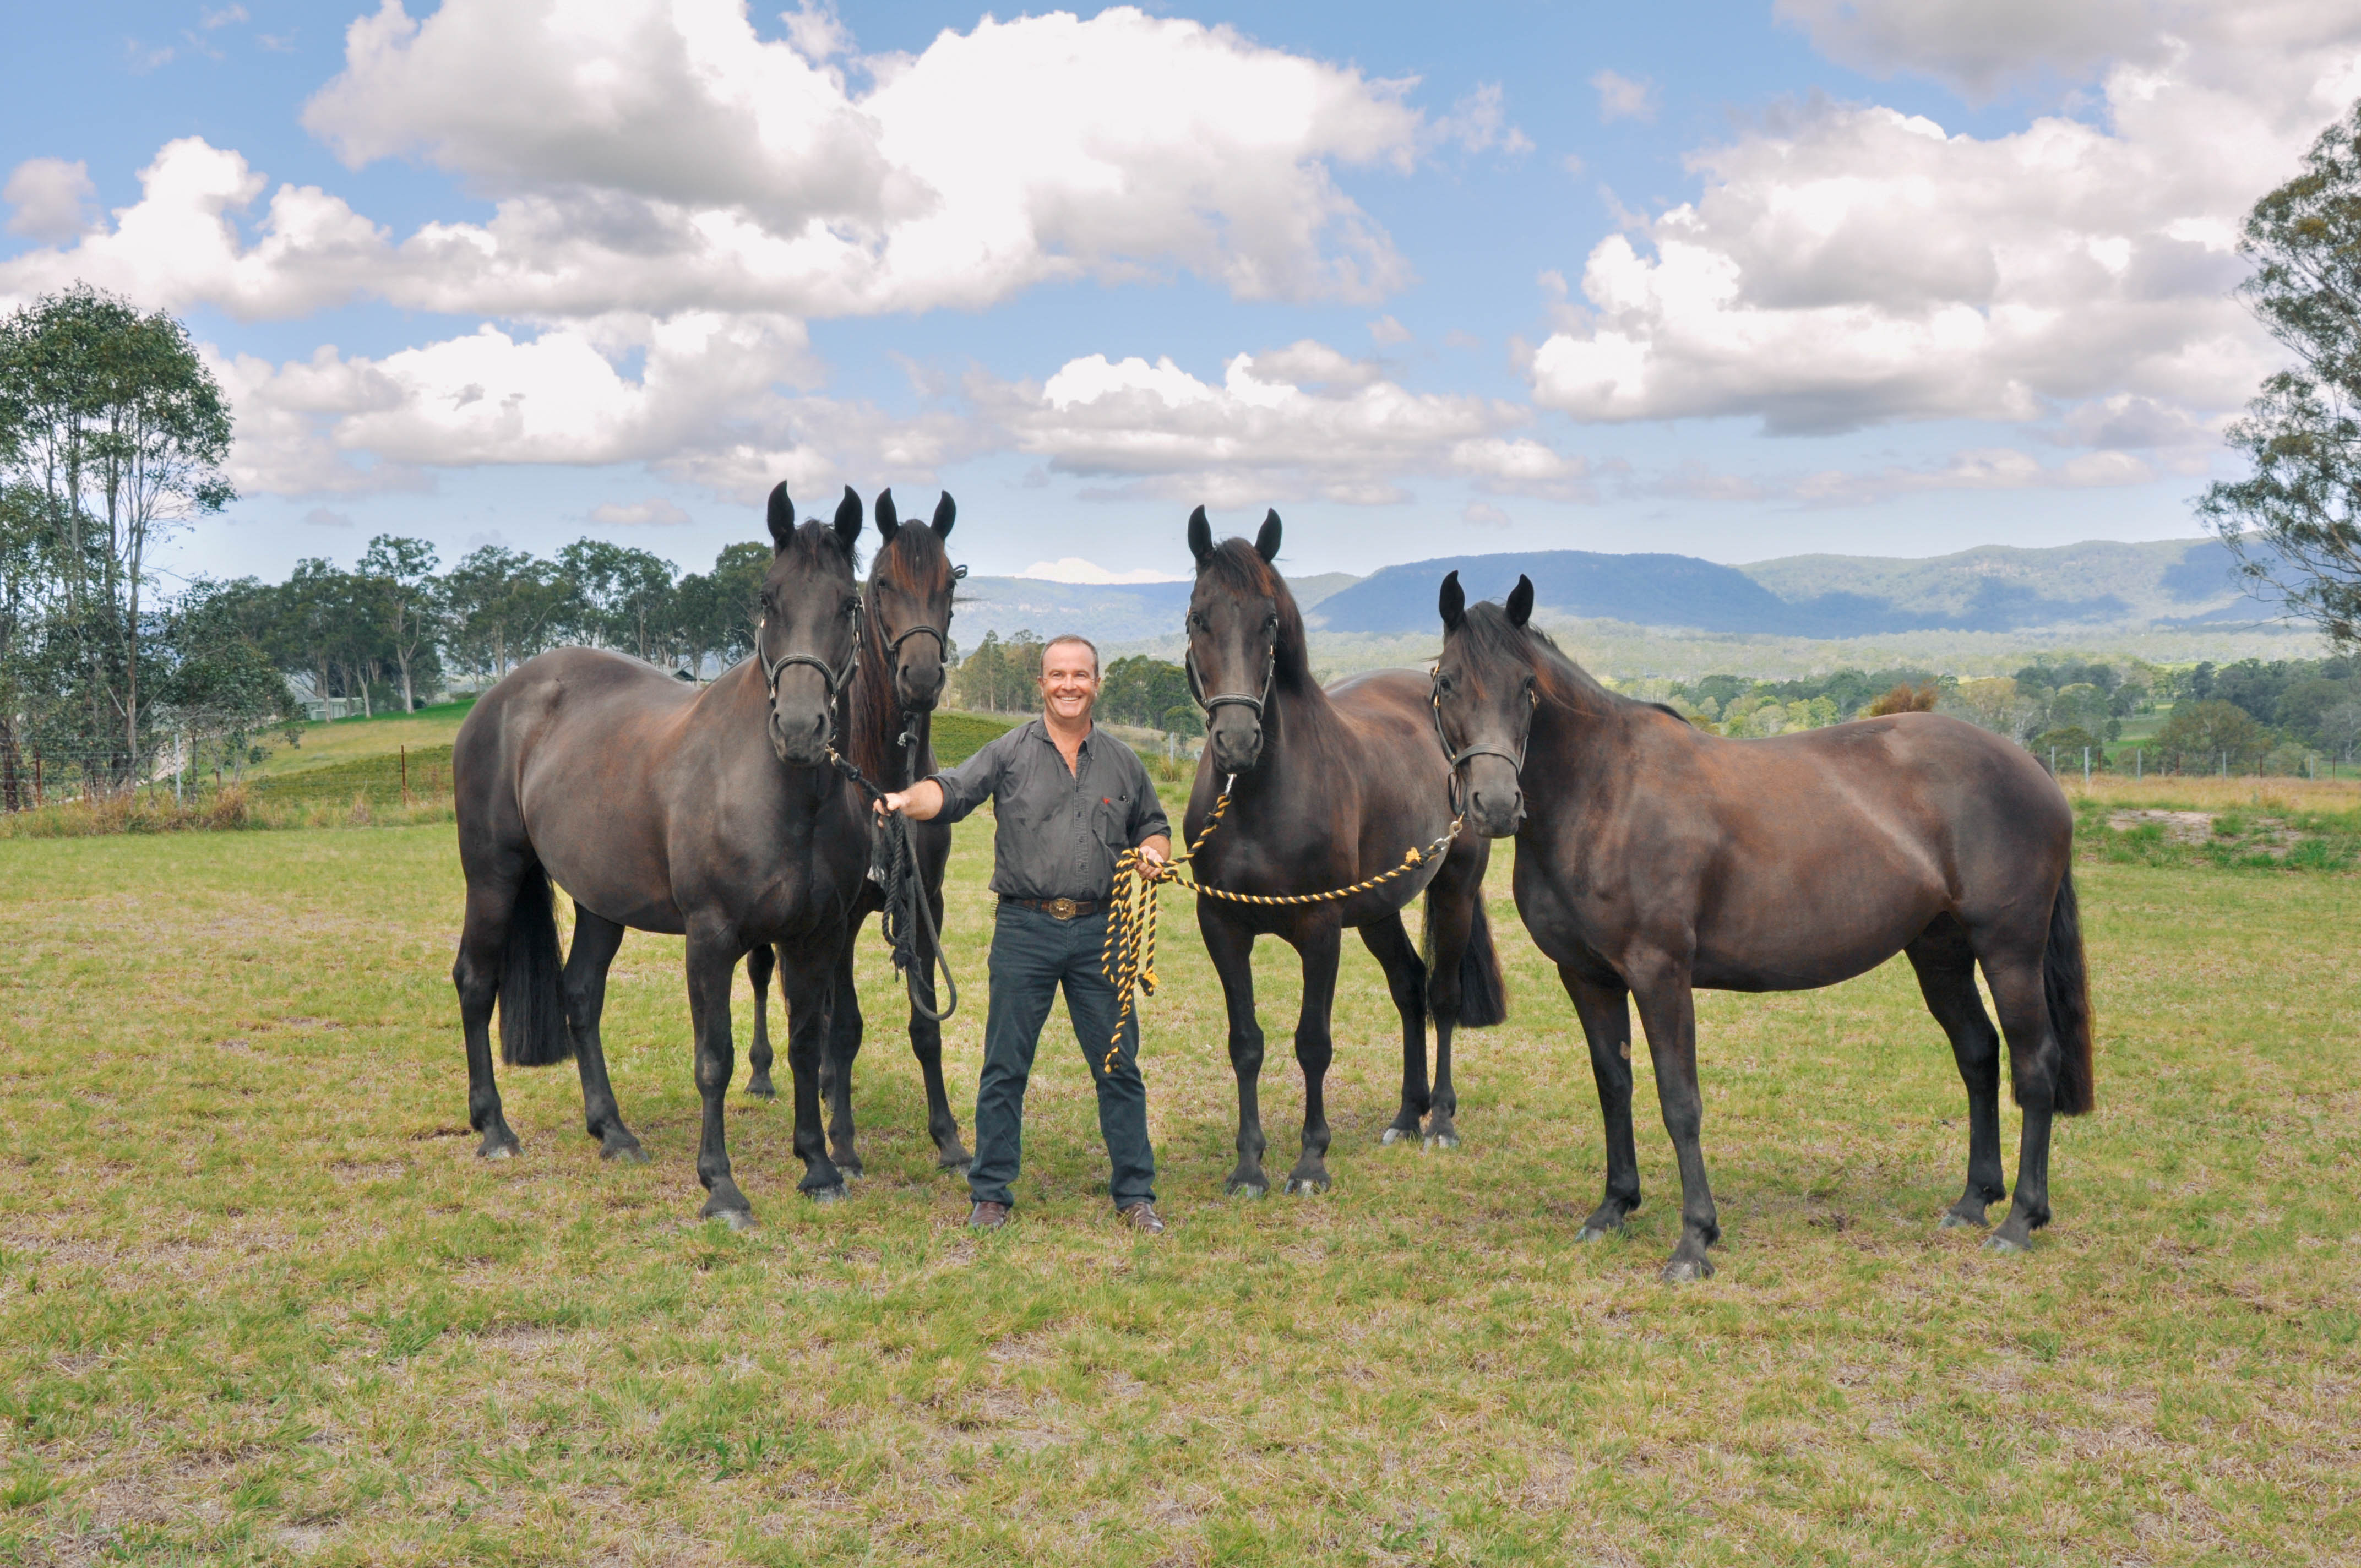 Paul McGreevy holding bay horses in a rural Australian landscape.